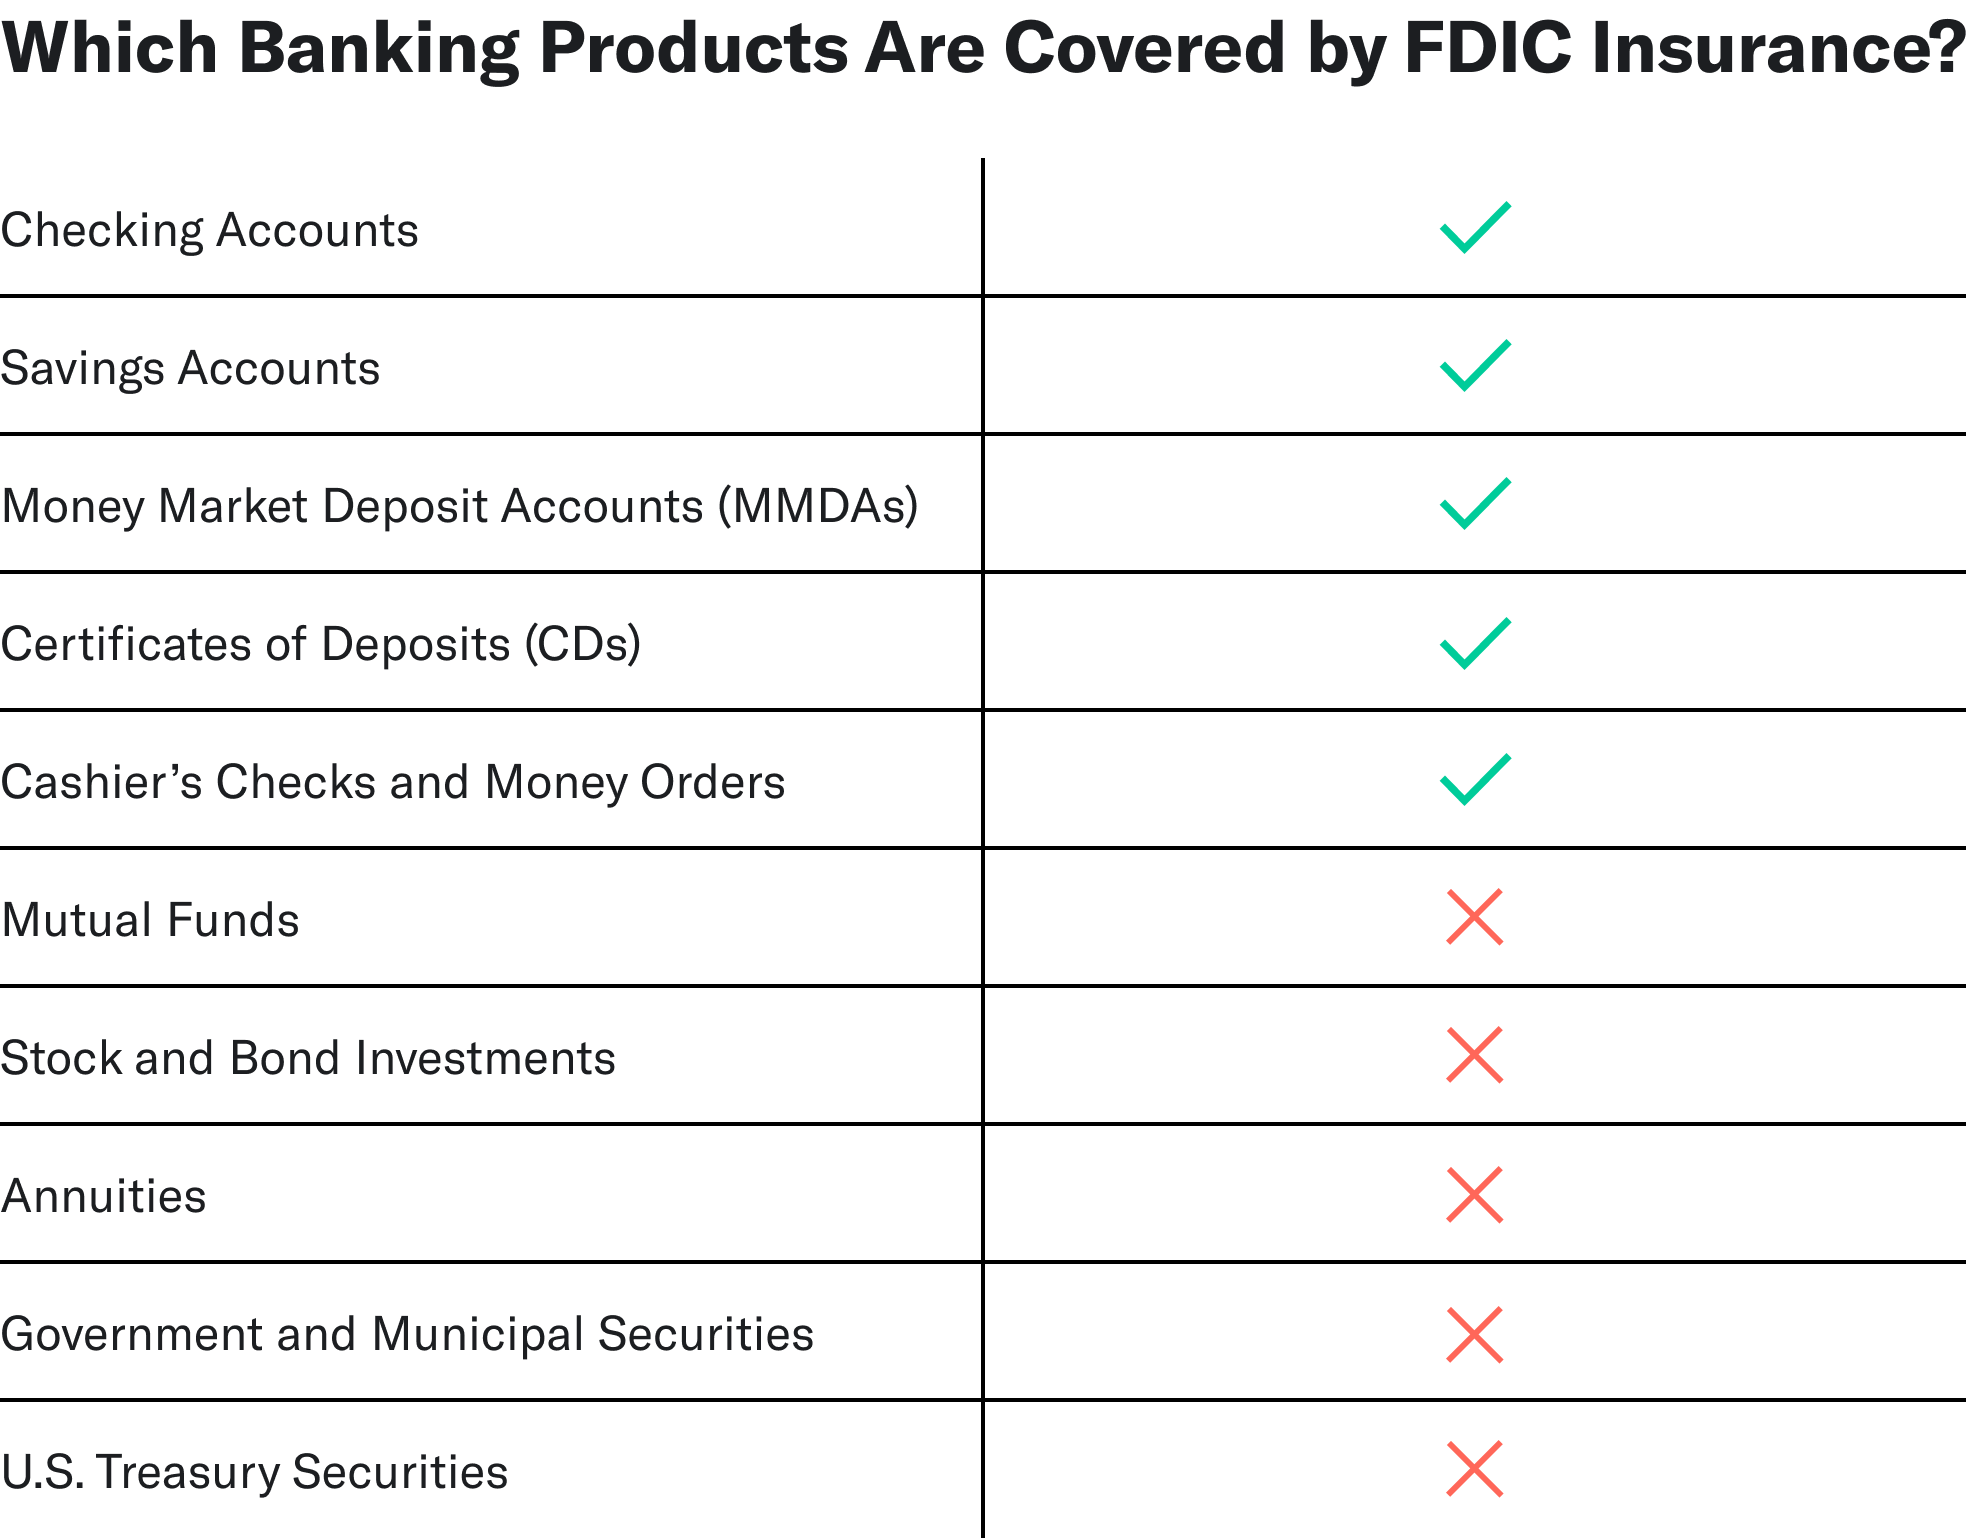 List of products covered and not covered by FDIC insurance